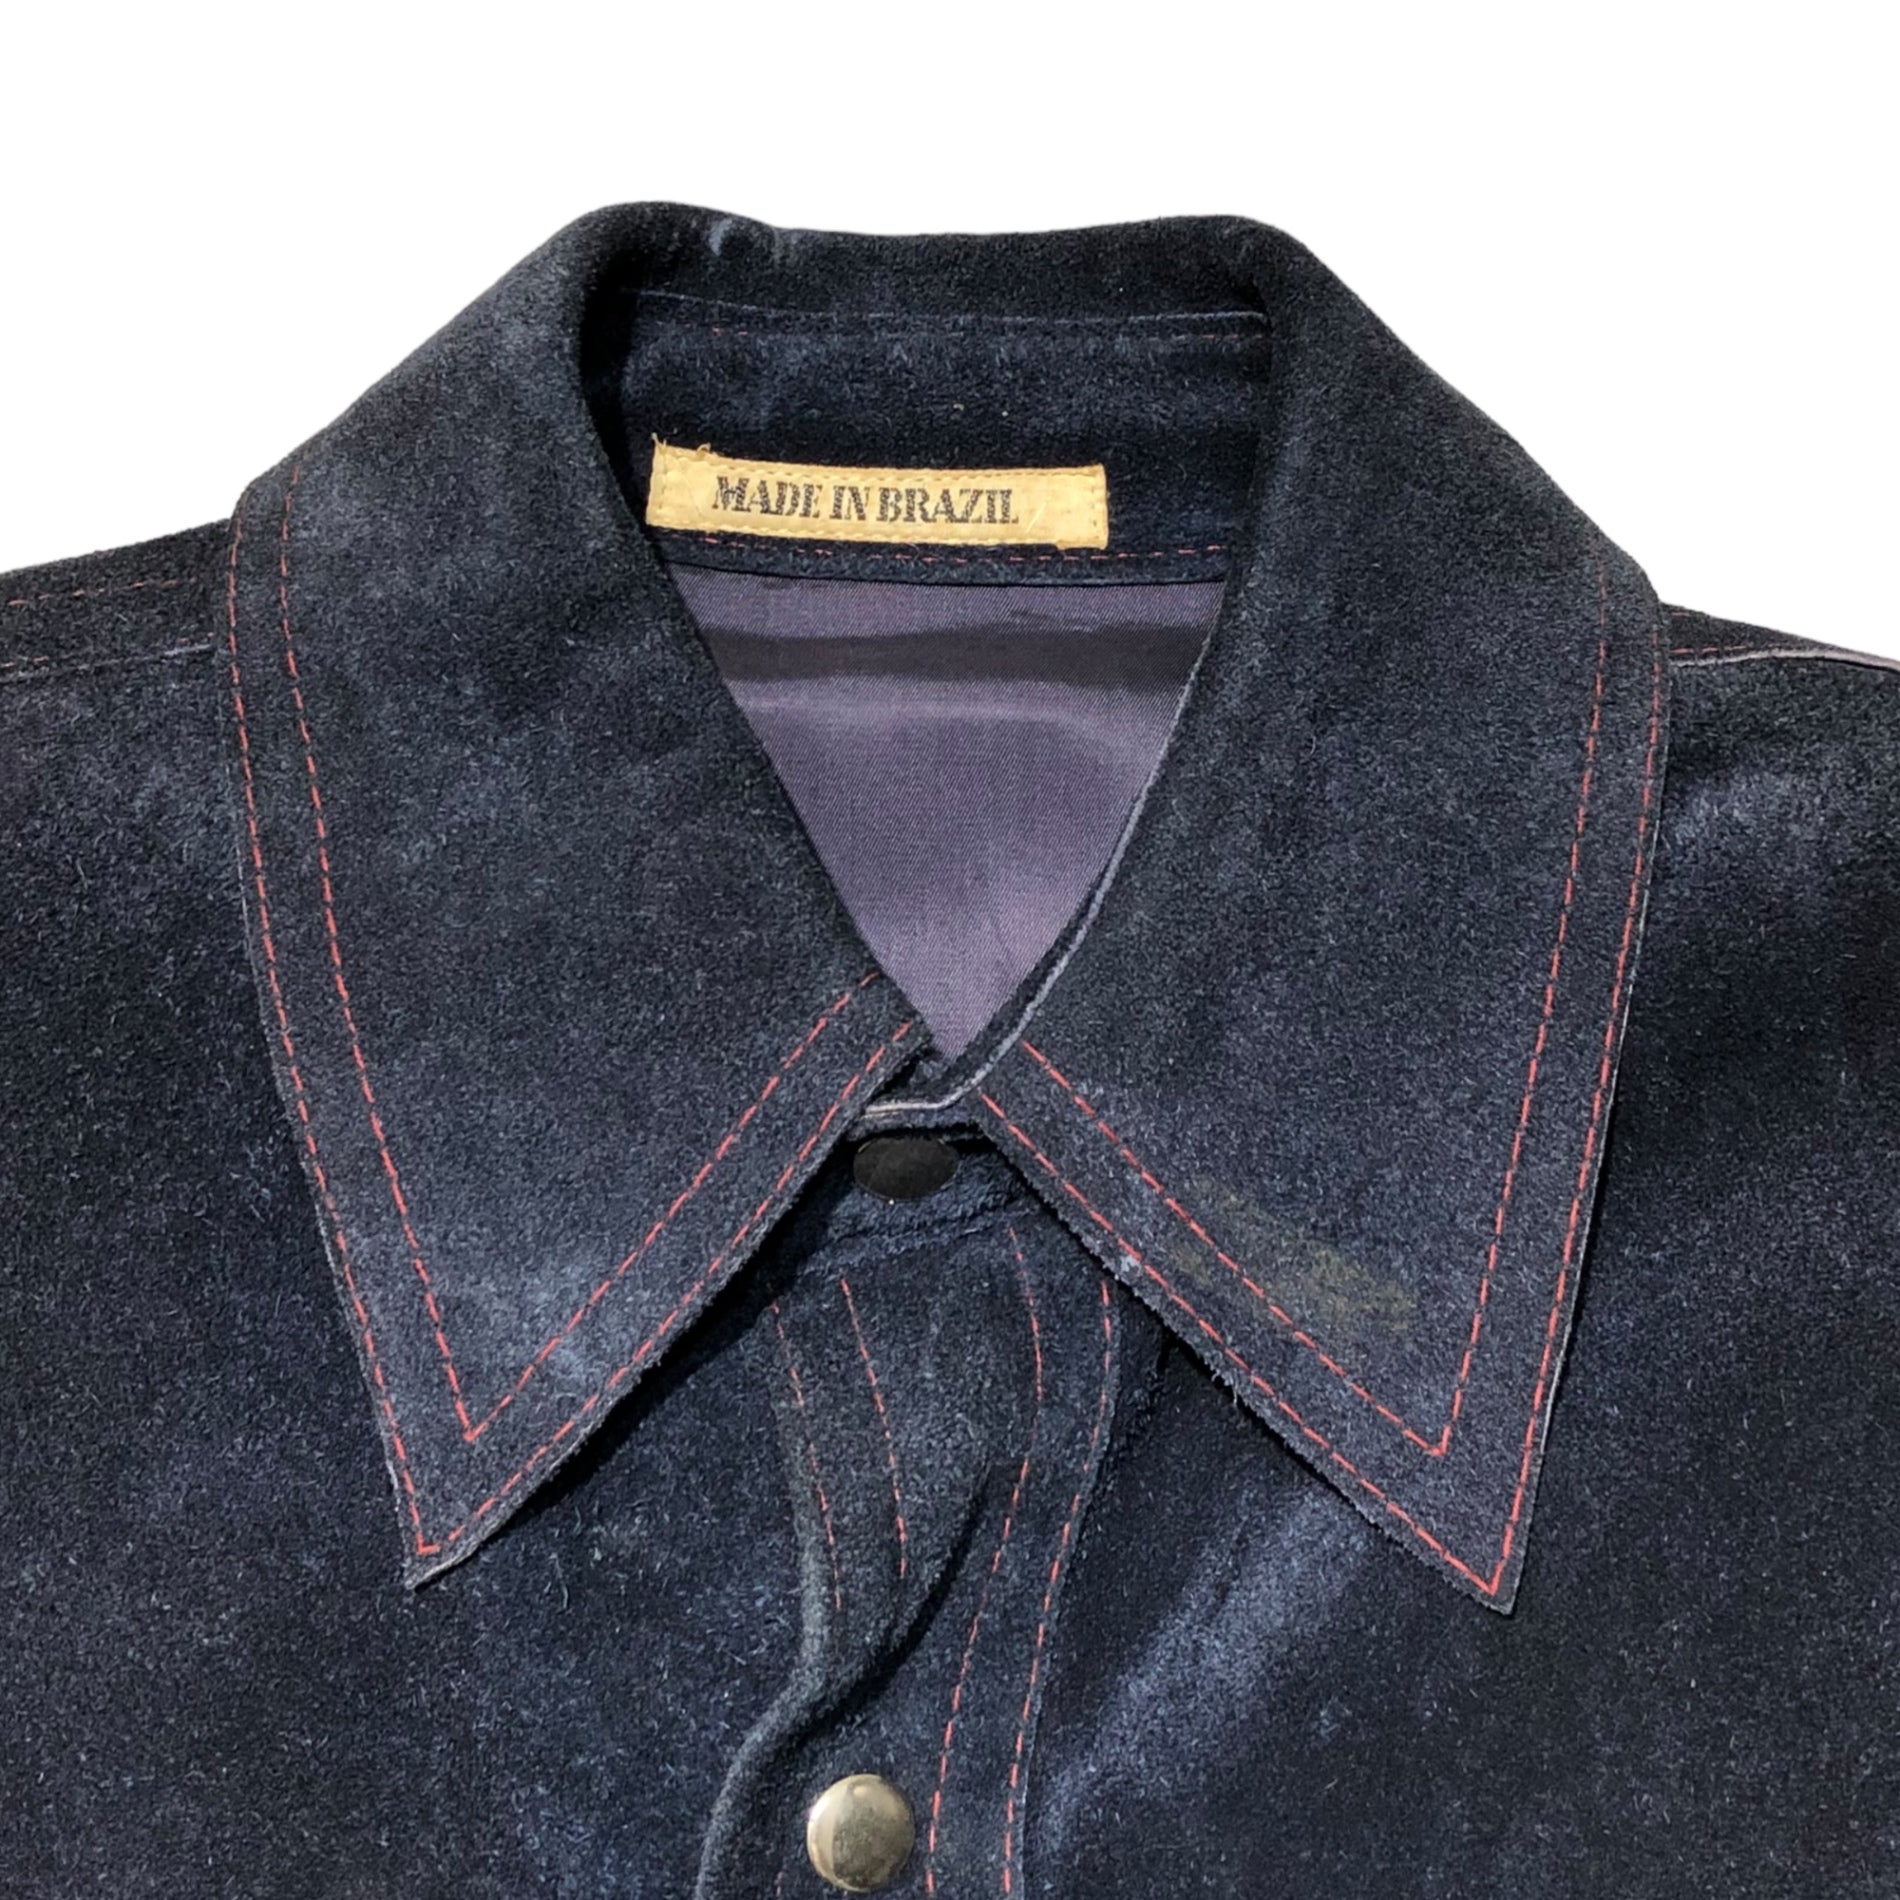 WILLIAM BARRY(ウィリアムバリー) 70's  stitched suede jacket ステッチ スウェード ジャケット S ネイビー styled by william barry 70年代 ヴィンテージ シャツ